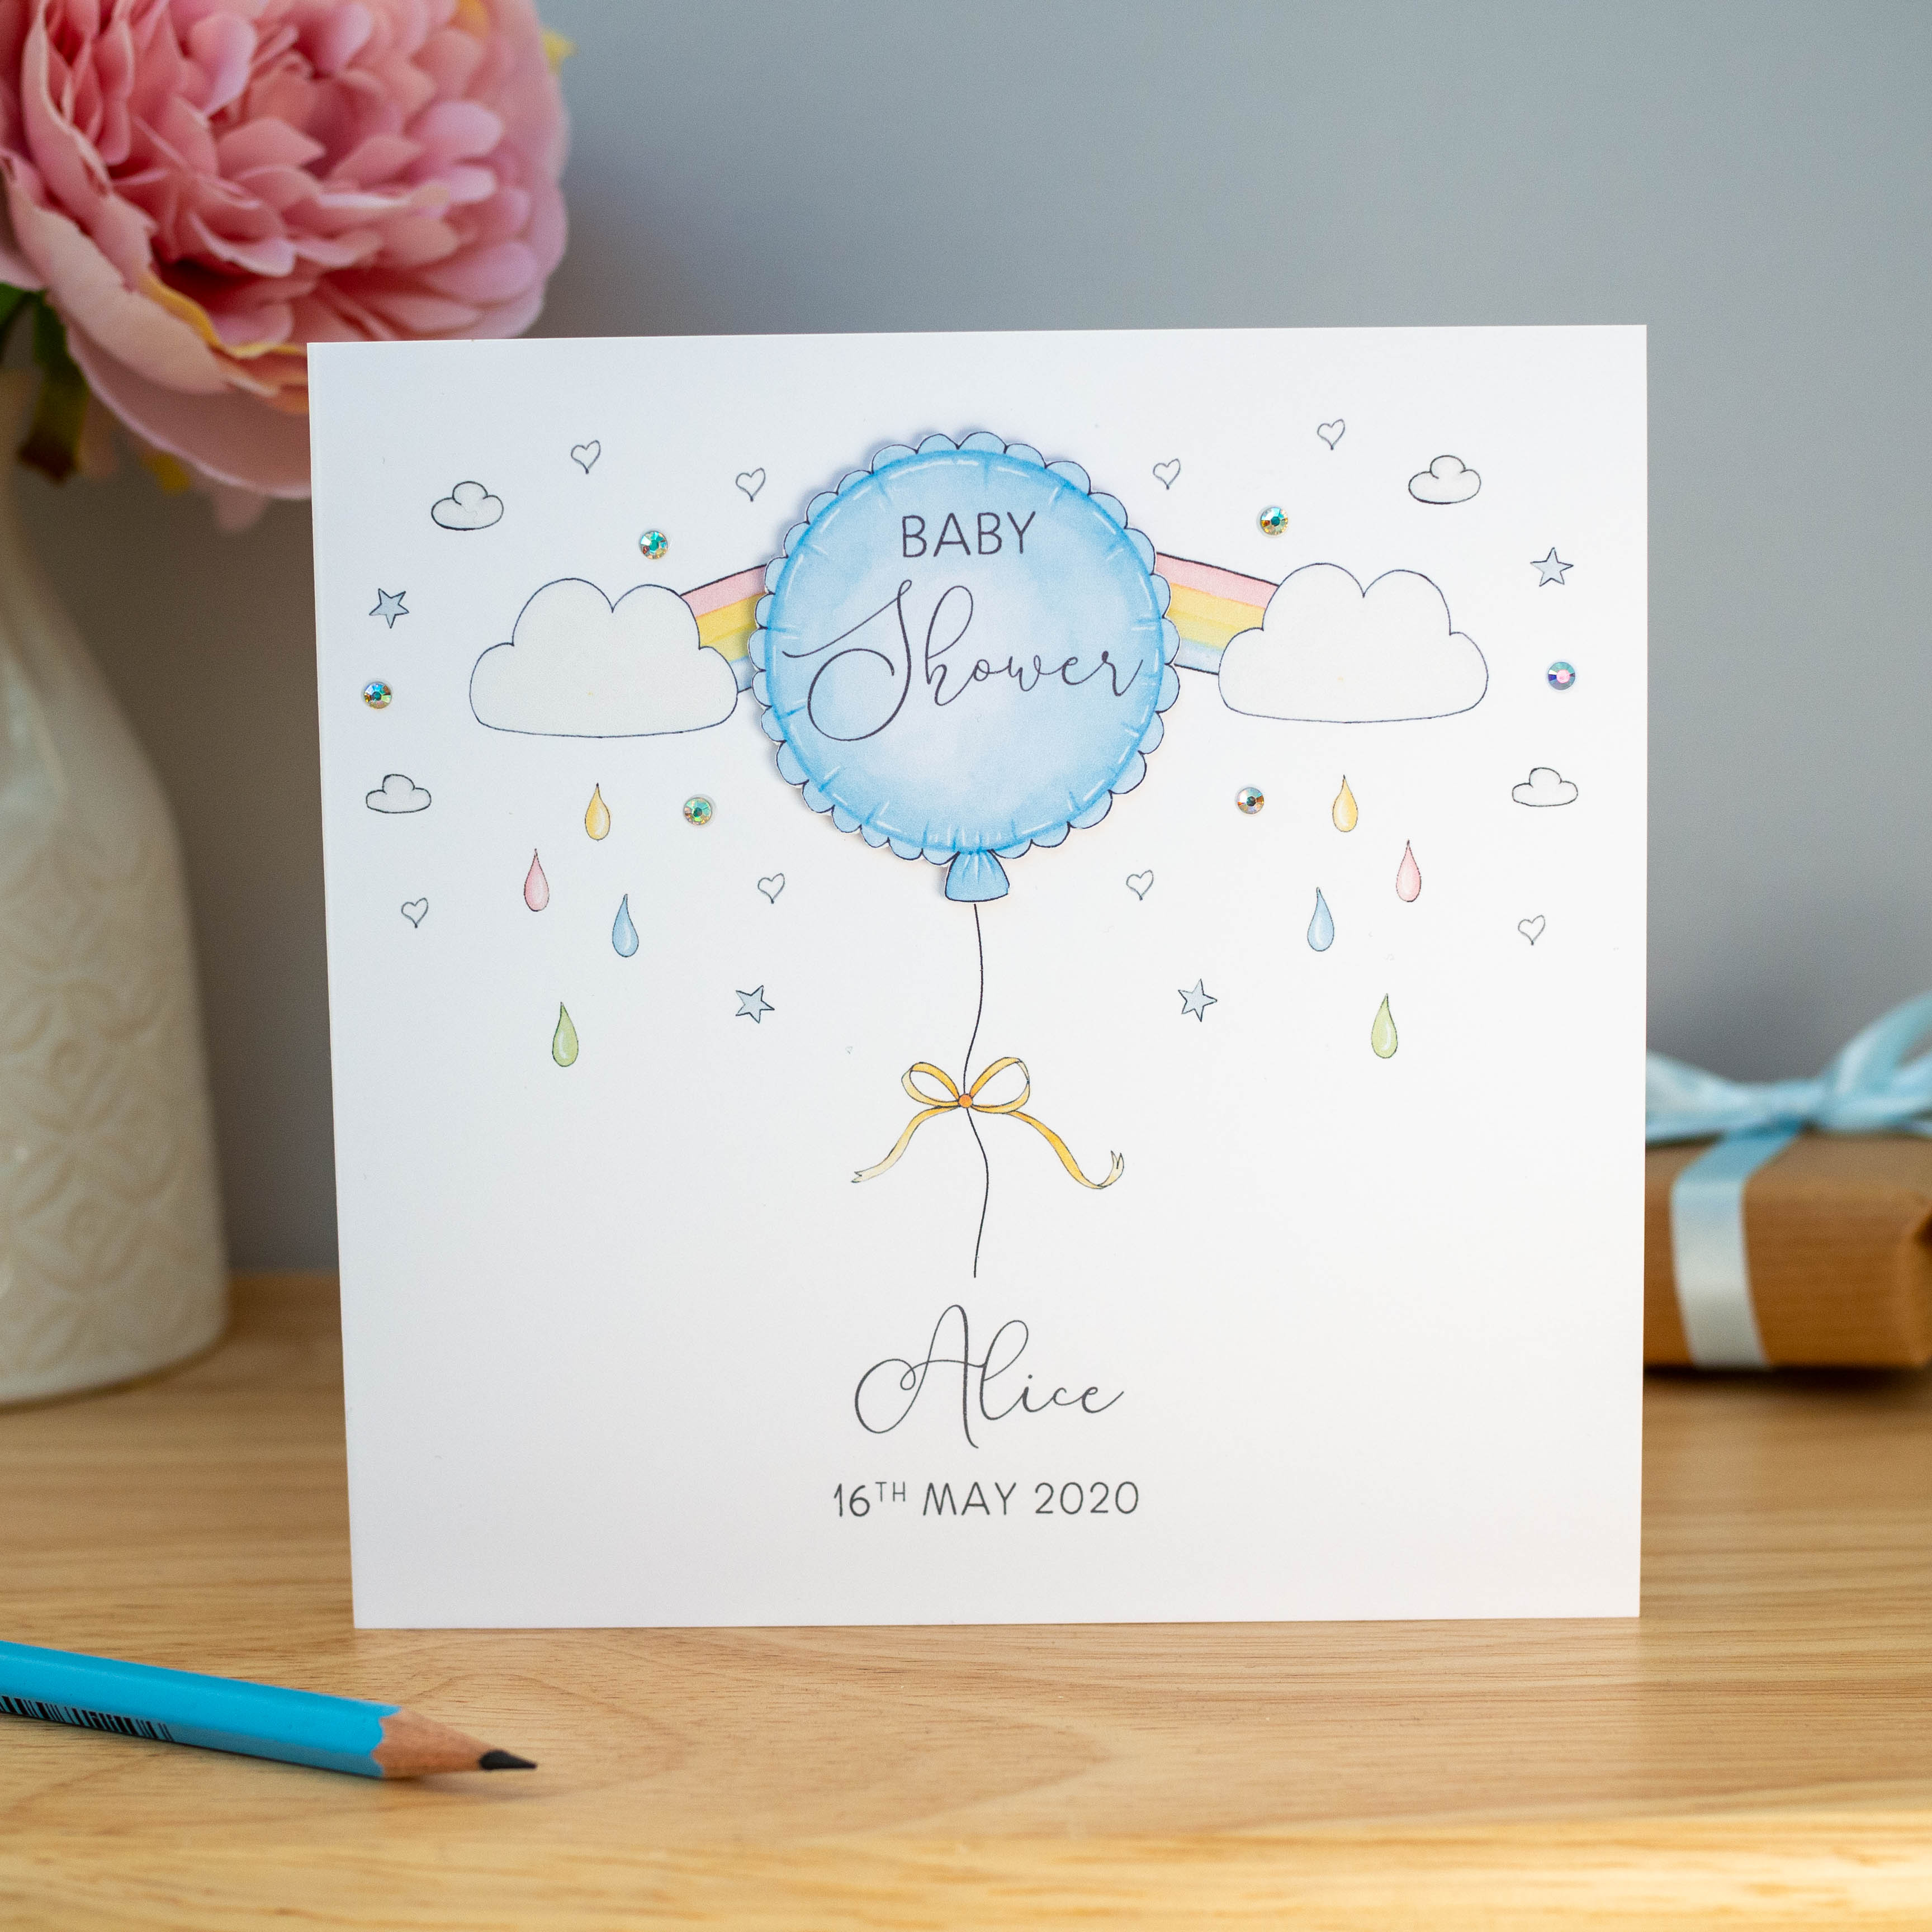 Personalised Baby Shower Card  Blue Balloon